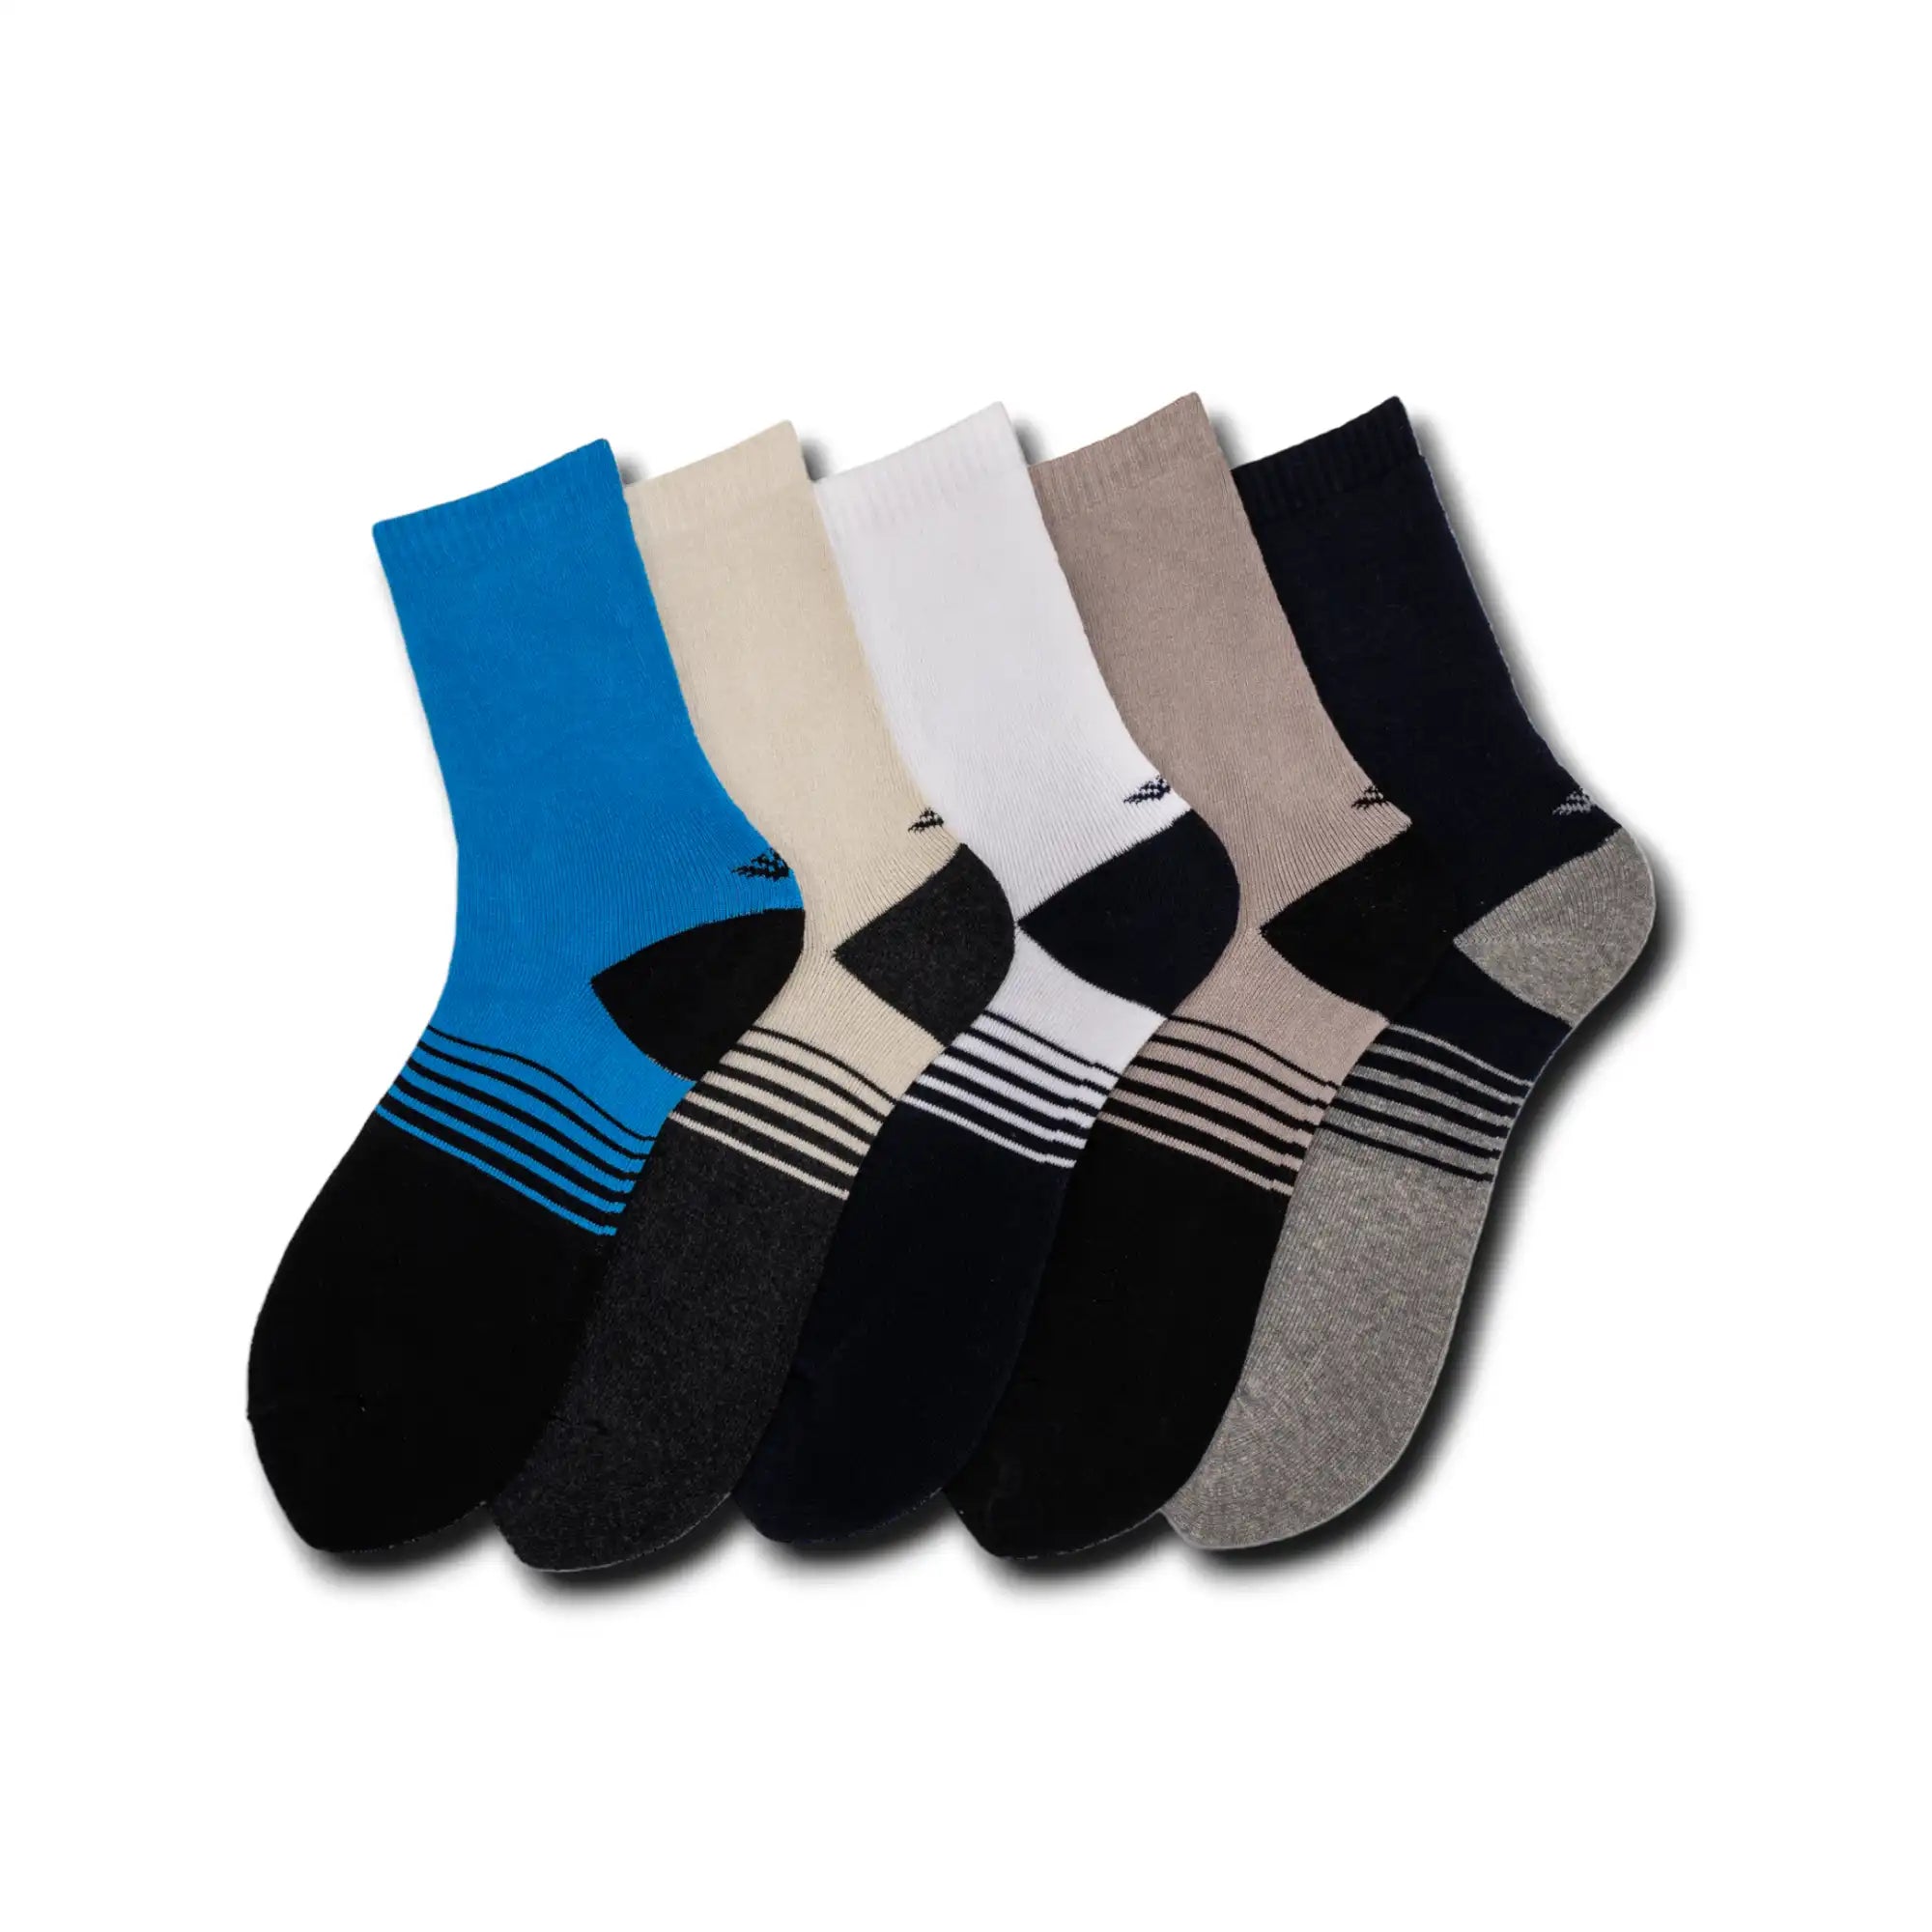 Young Wings Men's Multi Colour Cotton Fabric Design Full Length Socks - Pack of 3, Style no. M1-370